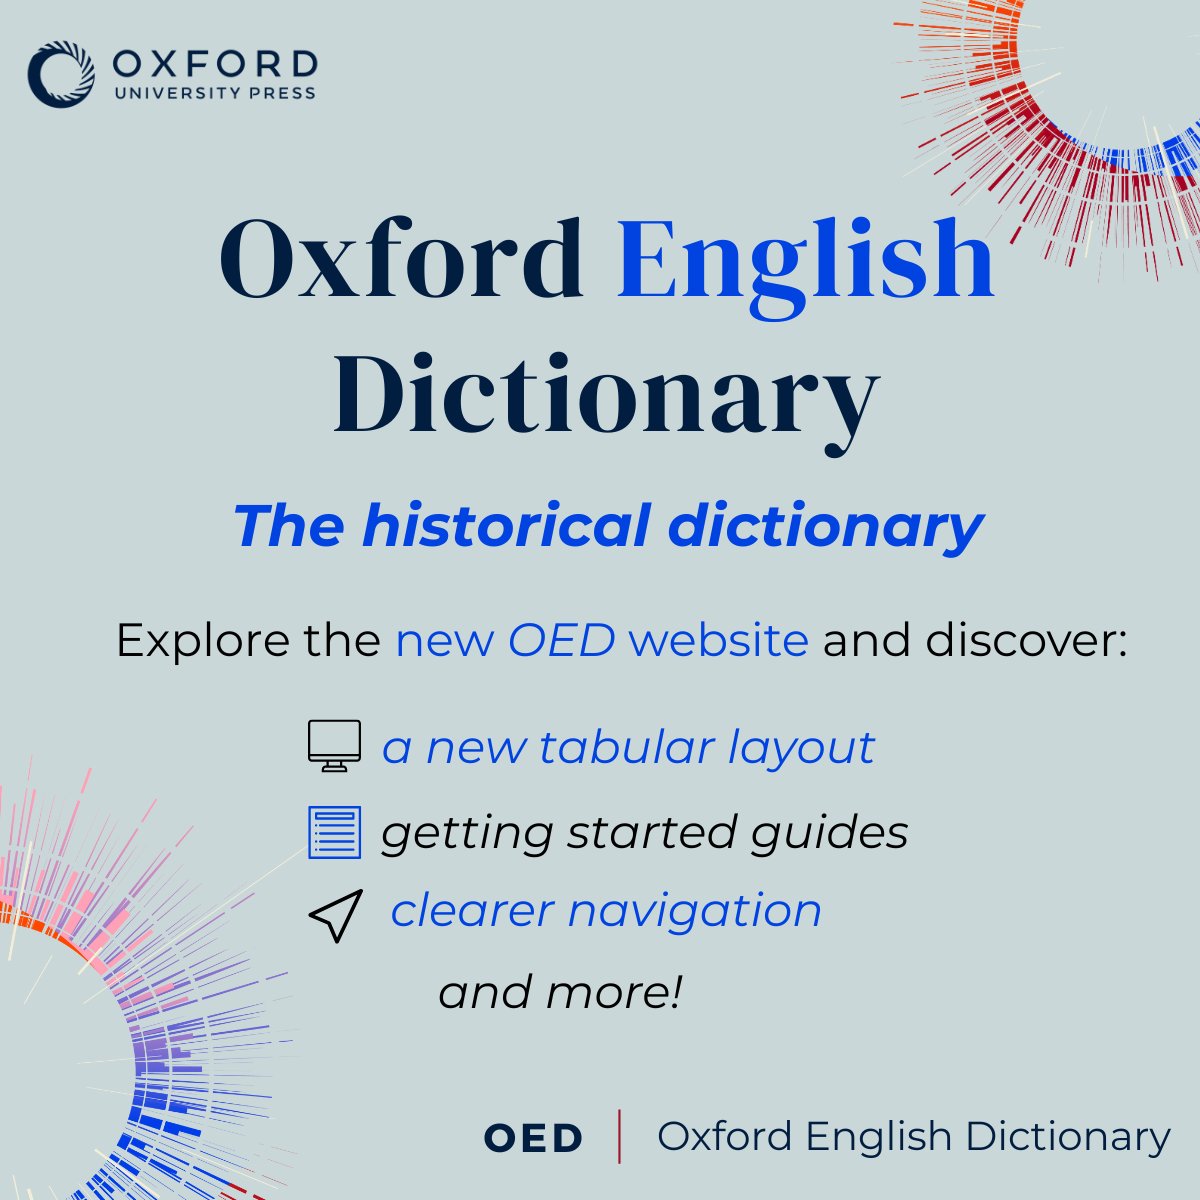 The new OED website has just launched 🎉 The new site places OED data at the heart of the academic research journey and provides clearer navigation, making all the rich content in the OED easy to access and understand. Take a look for yourself here: oed.com